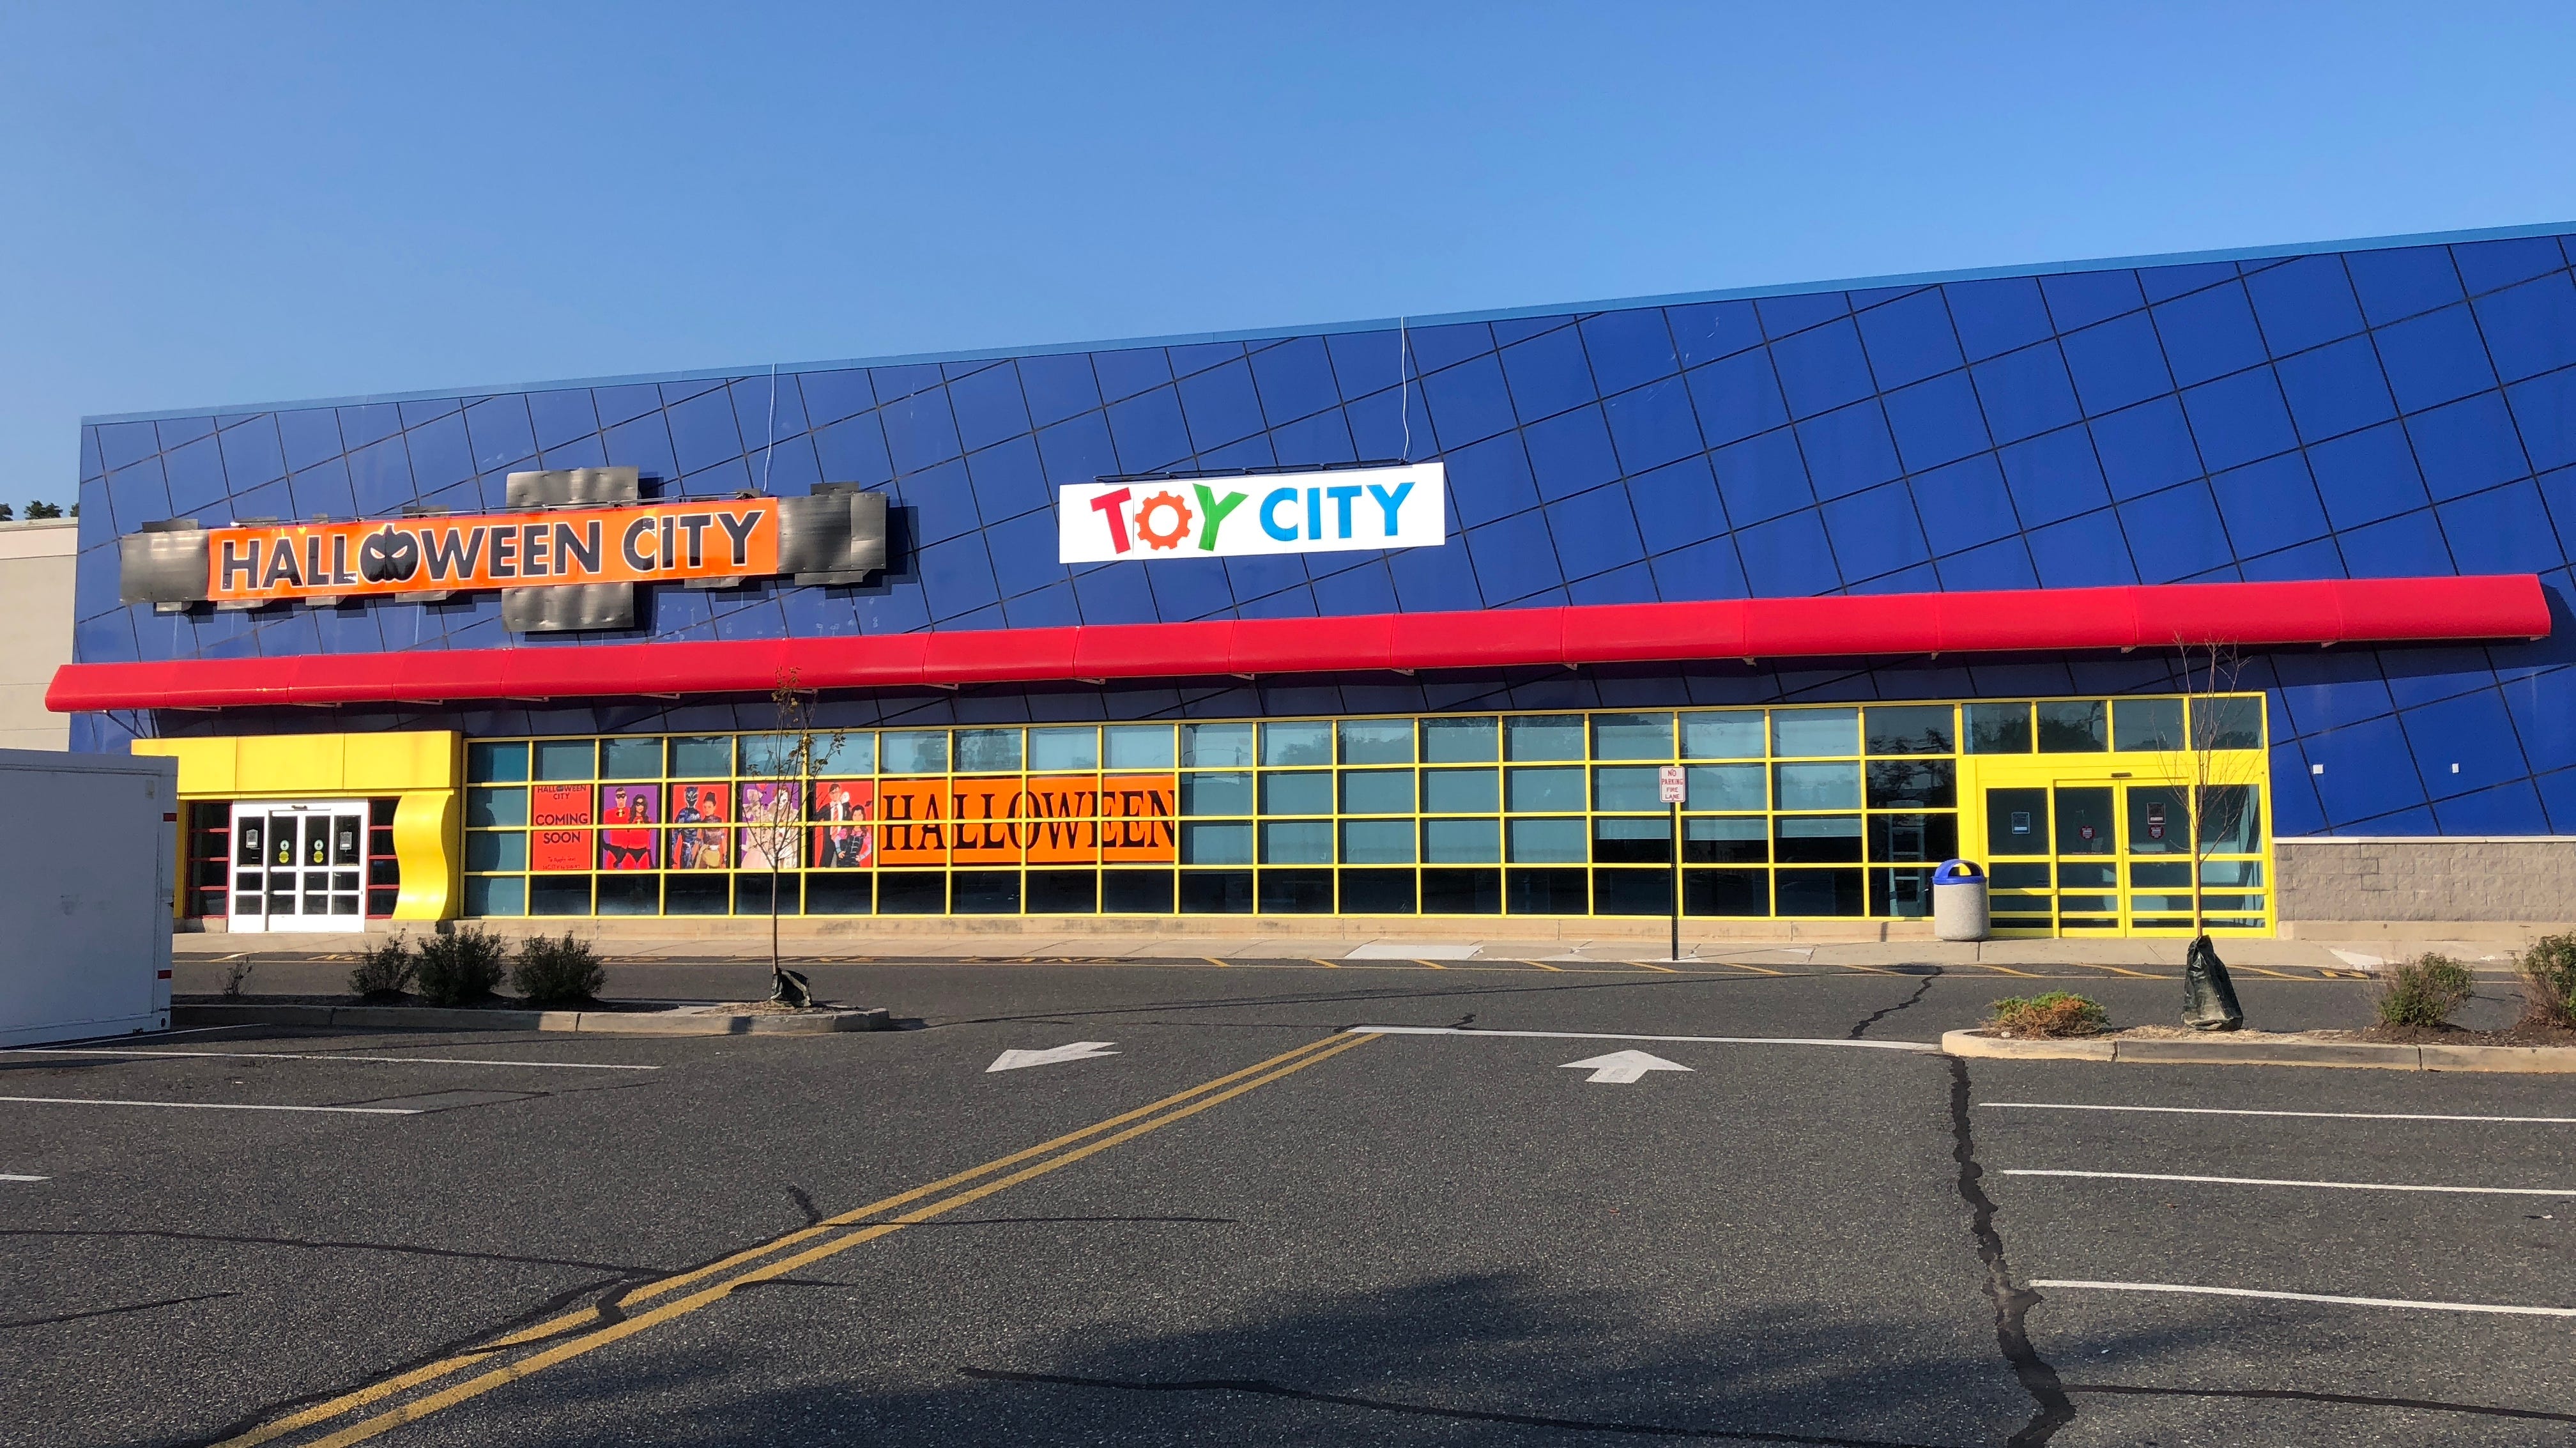 toys r us game city